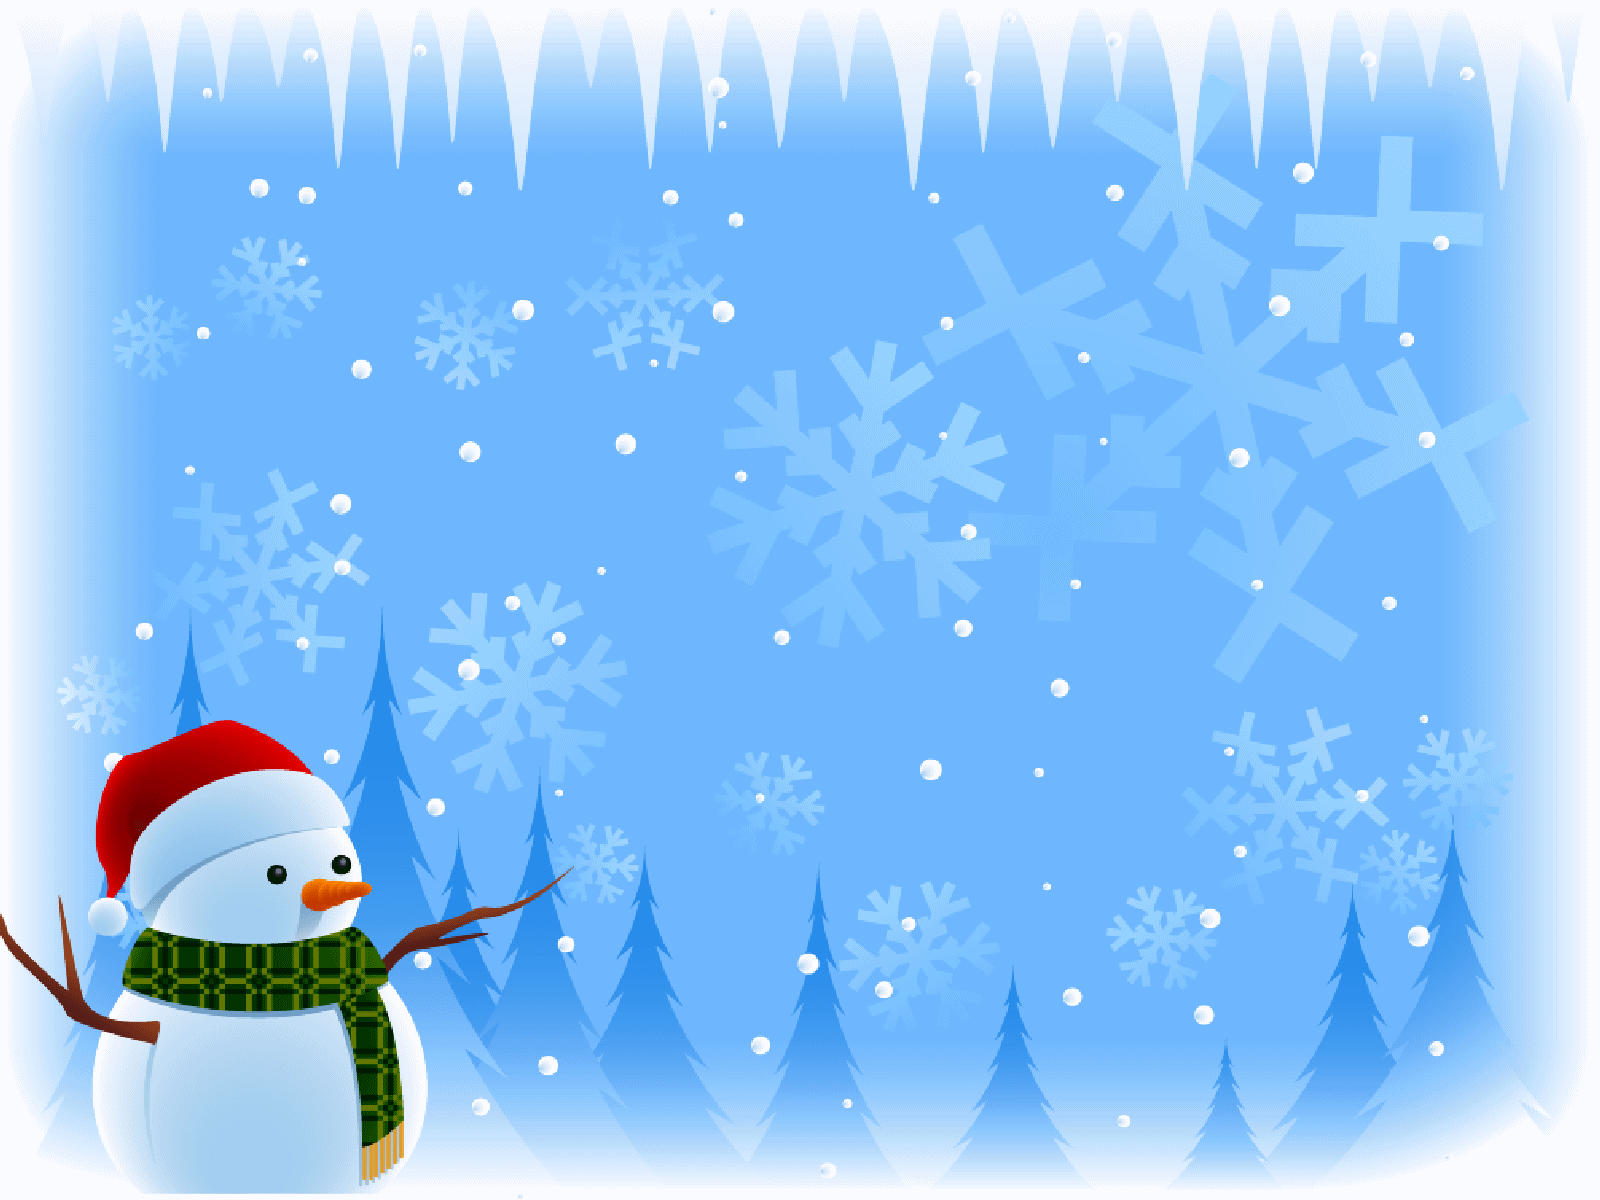 50 Free Christmas and Winter Holiday Wallpapers